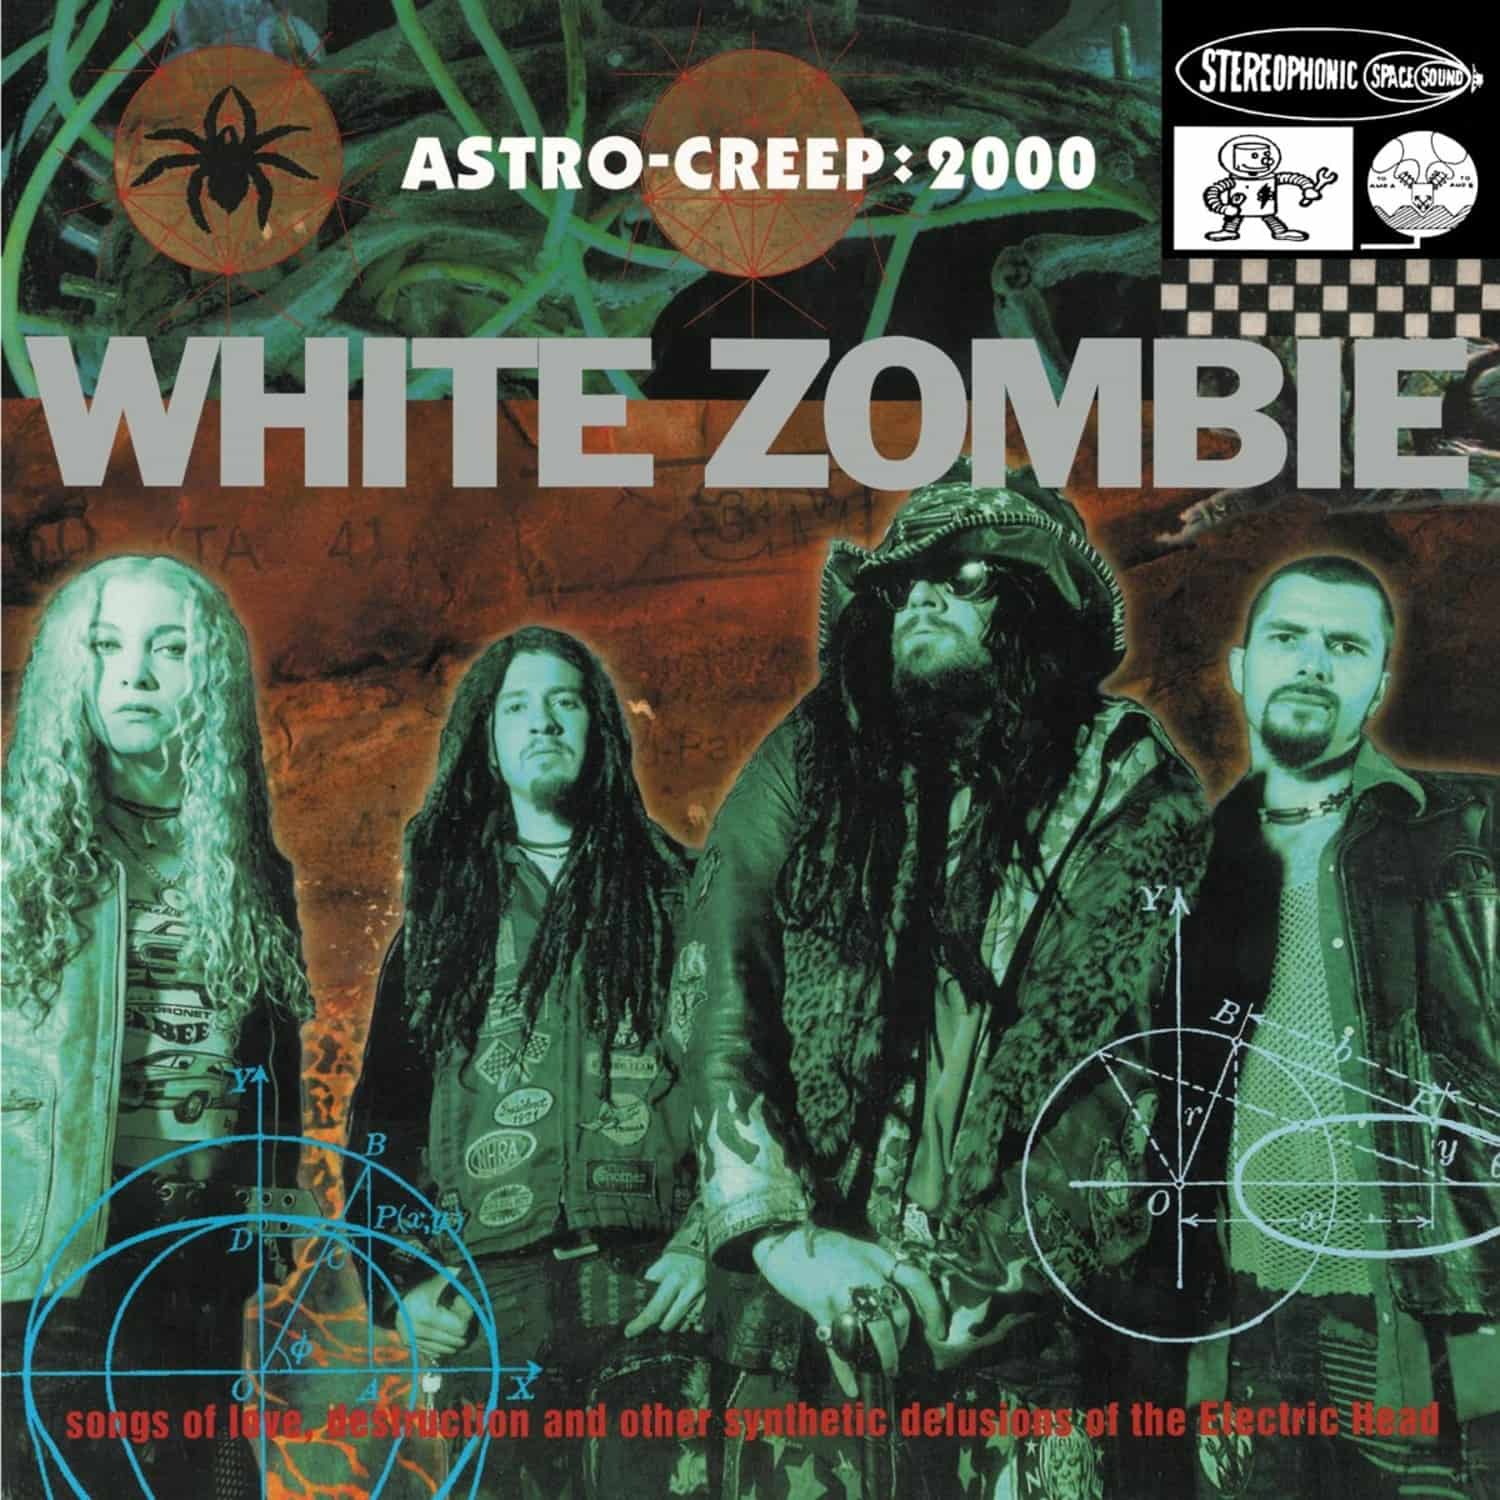 White Zombie - ASTRO-CREEP:2000 SONGS OF LOVE & OTHER DELUSIONS O 